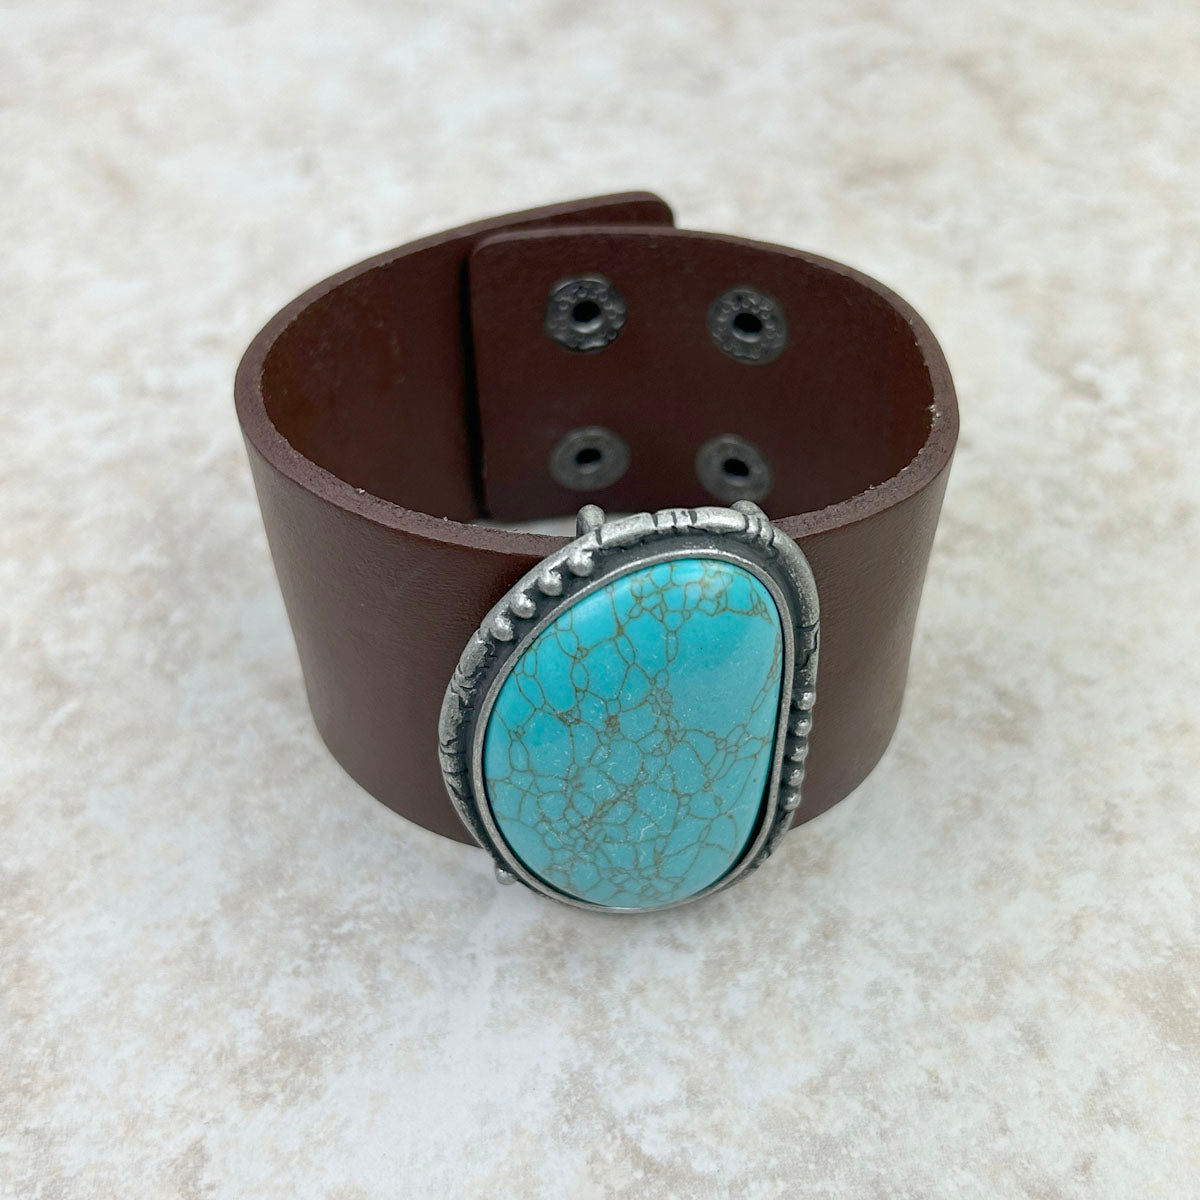 Turquoise Stone with Dark Brown Leather Cuff Bracelet